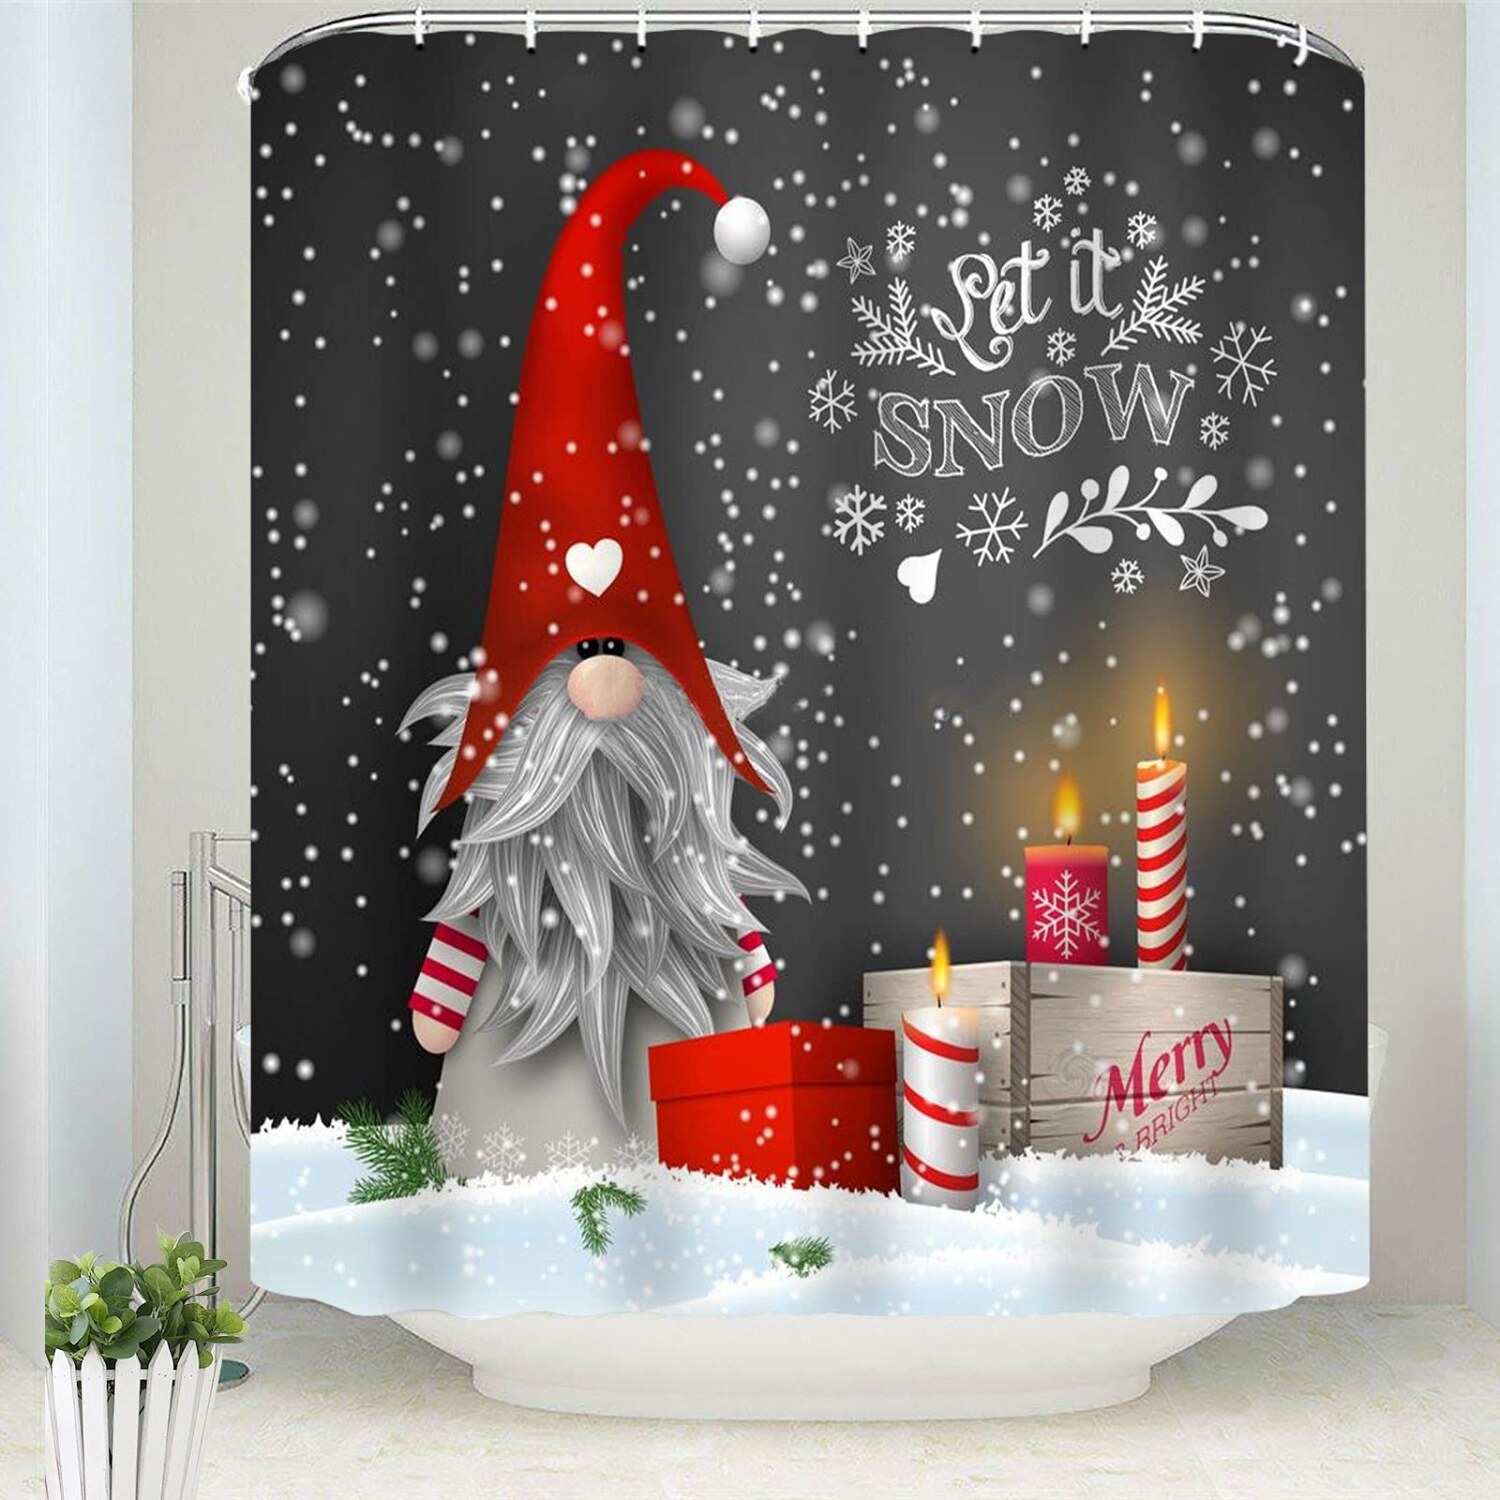 Winter Wonderland Gnome Shower Curtain Set - Cute Sprite Design, Let it Snow Fabric, Holiday Bathroom Decor with Hooks, 60x72 inches